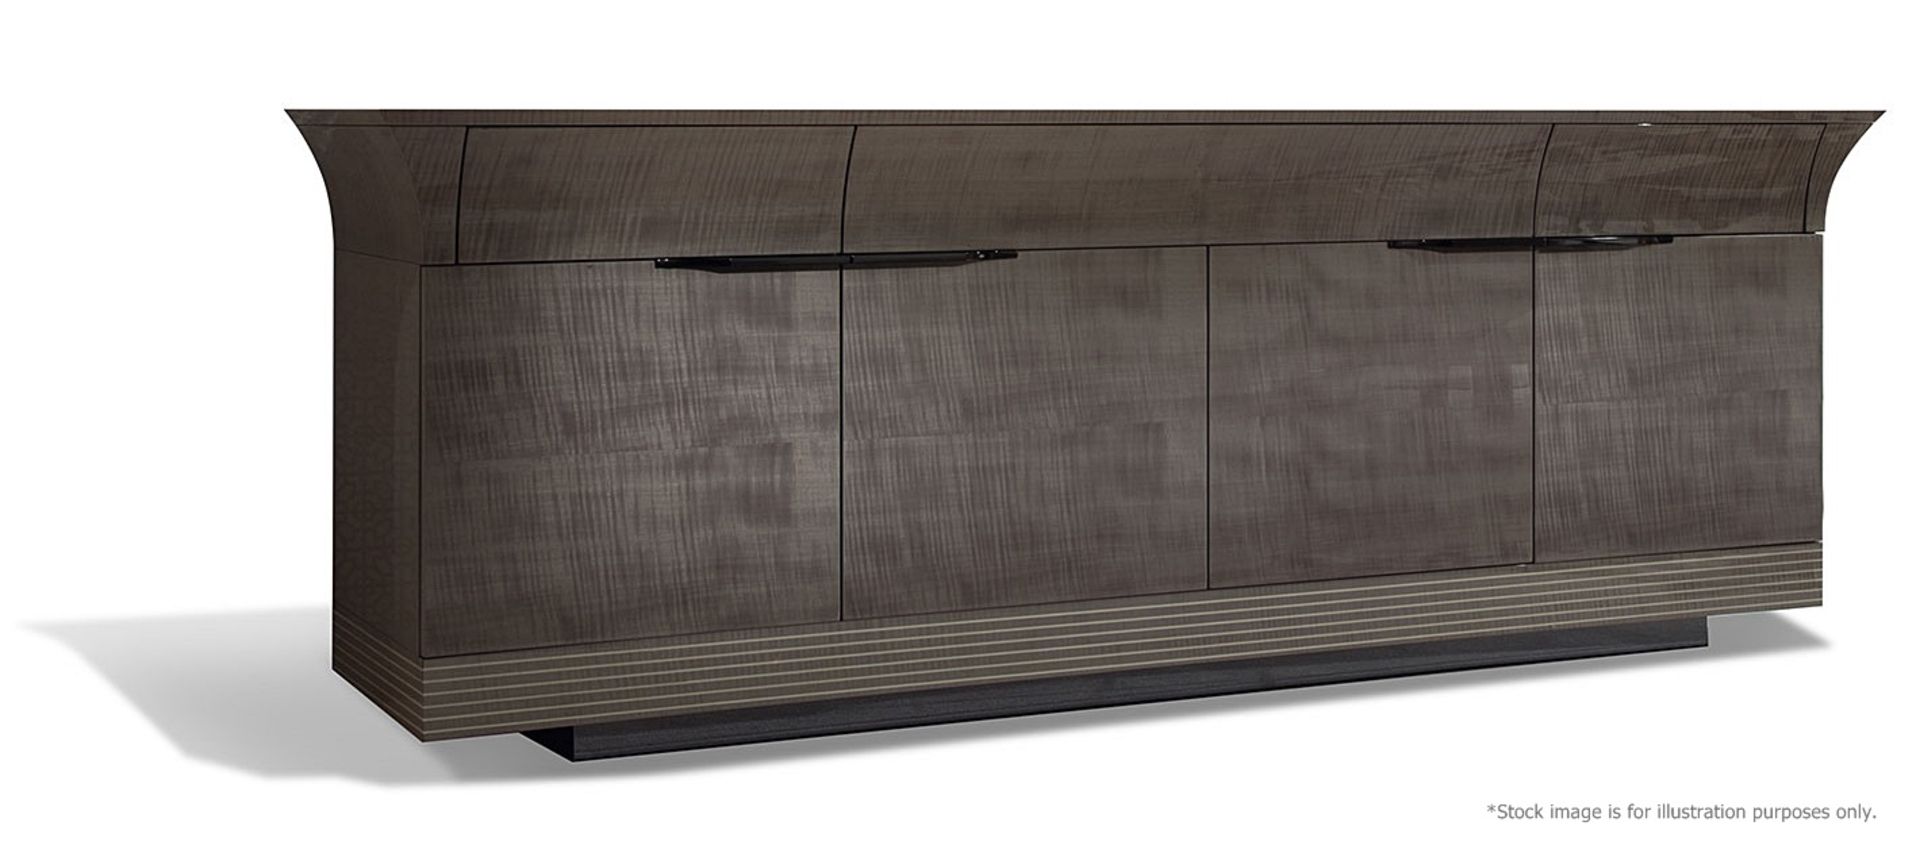 1 x GIORGIO COLLECTION 'Alchemy' Buffet / Sideboard Unit (Model: 6810/80) - Original RRP £3,495 - Image 2 of 8